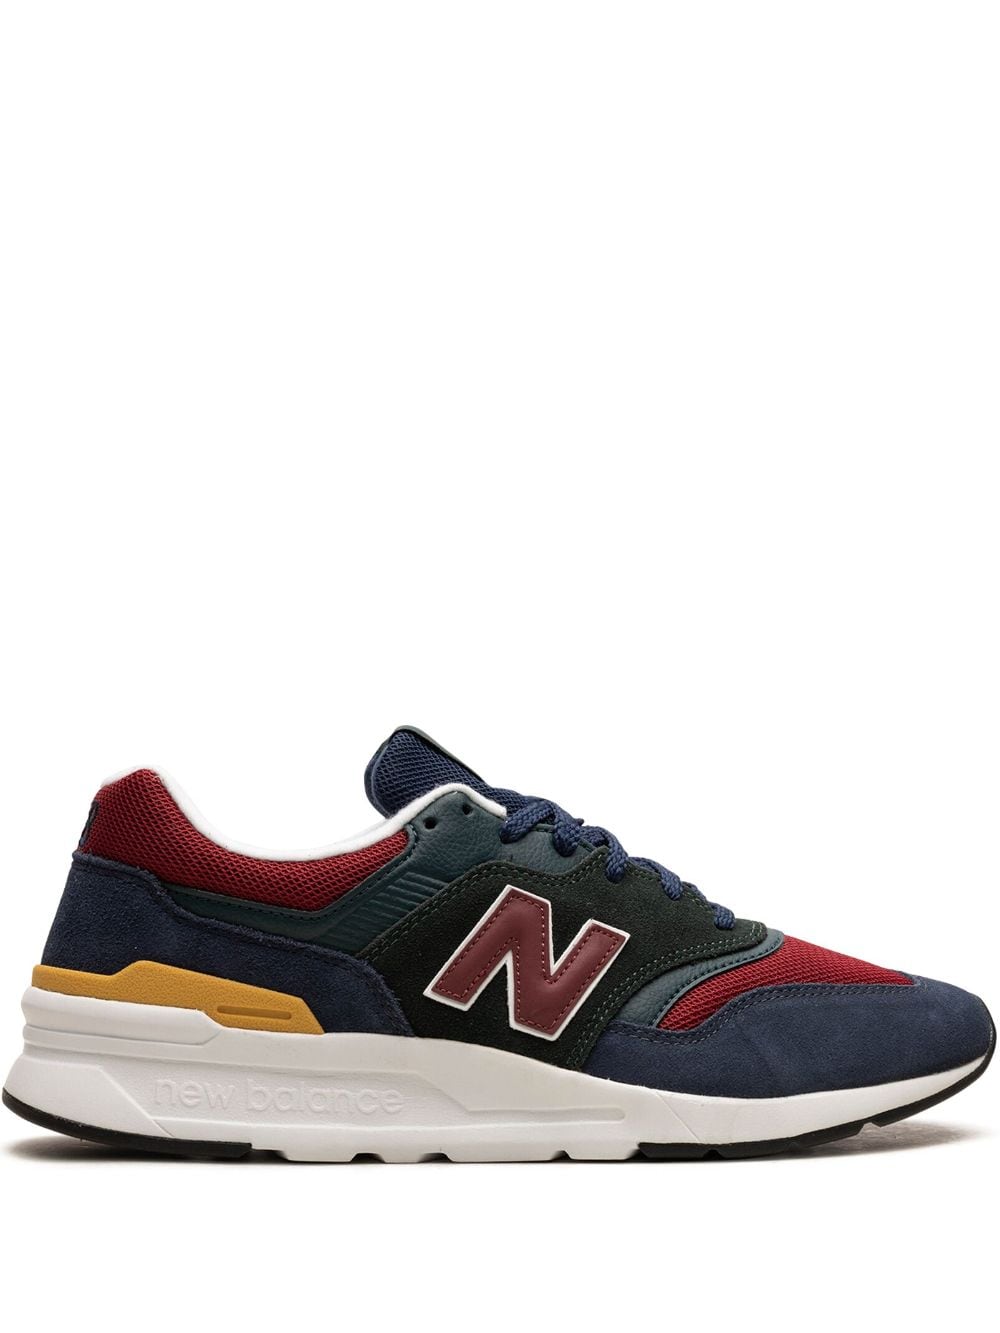 New Balance CM997HVQ lace-up sneakers - Blue